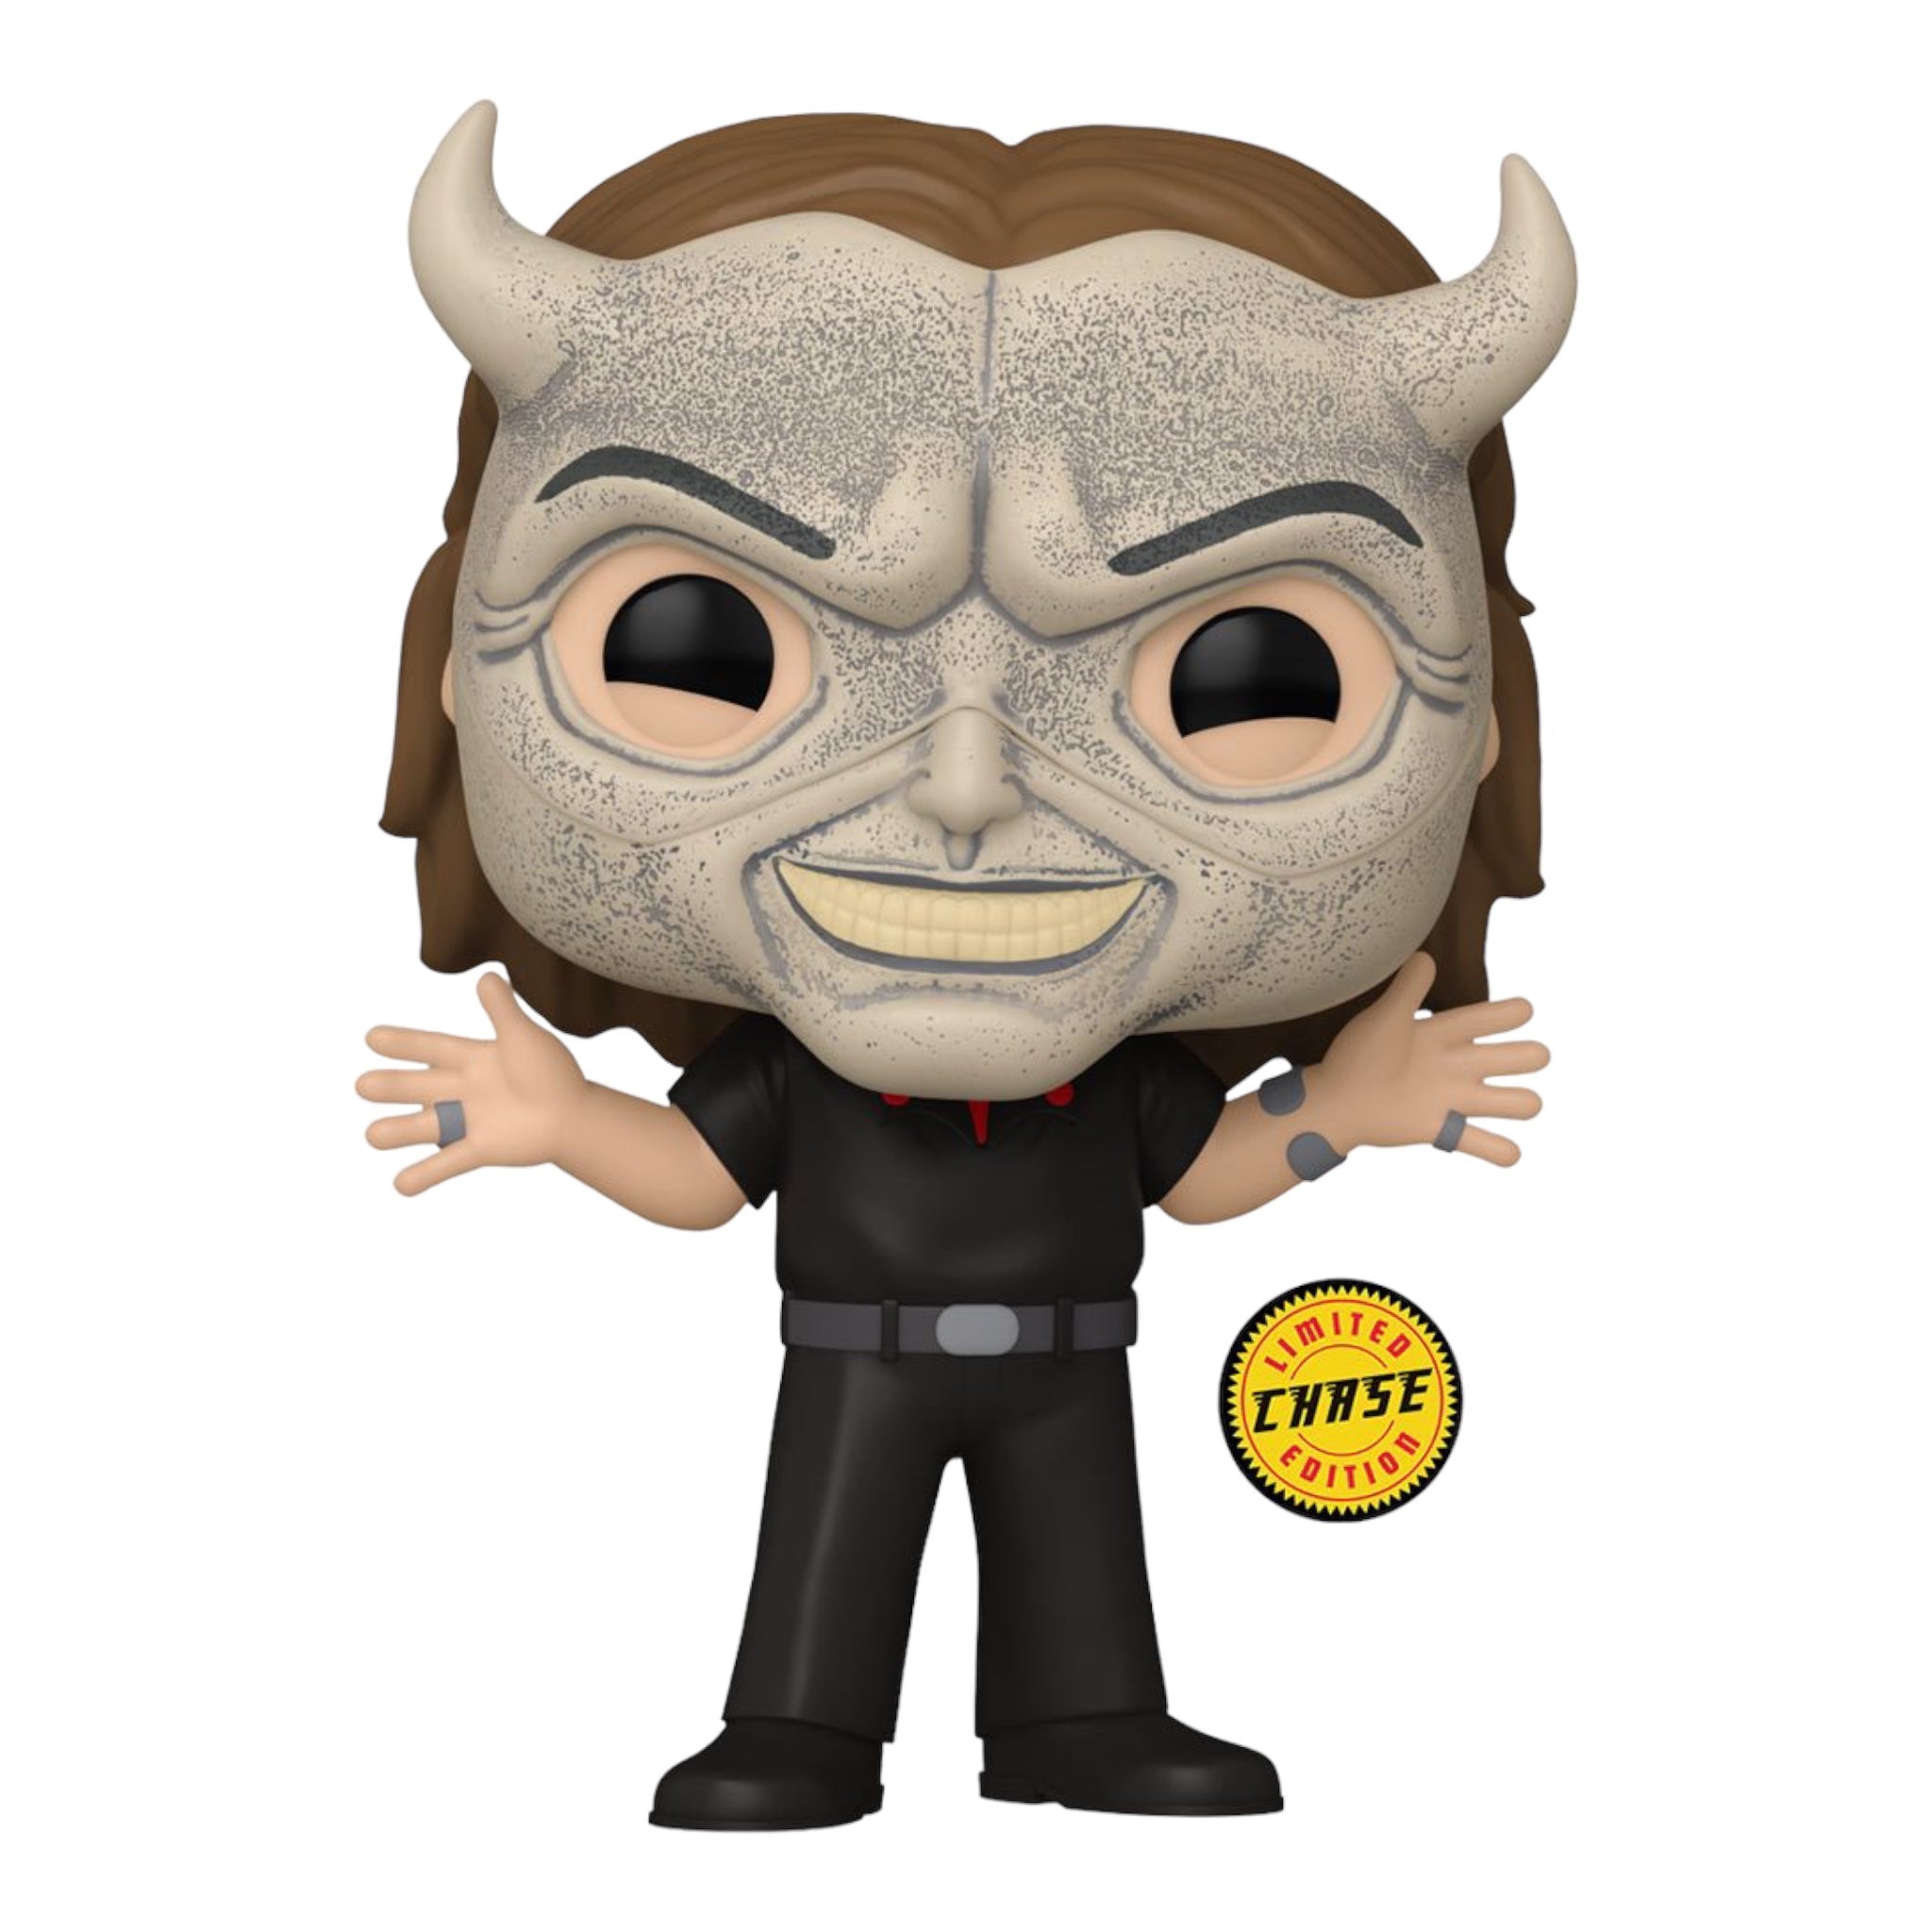 The Rock And Mankind Funko Pop! 2 Pack - The Pop Central